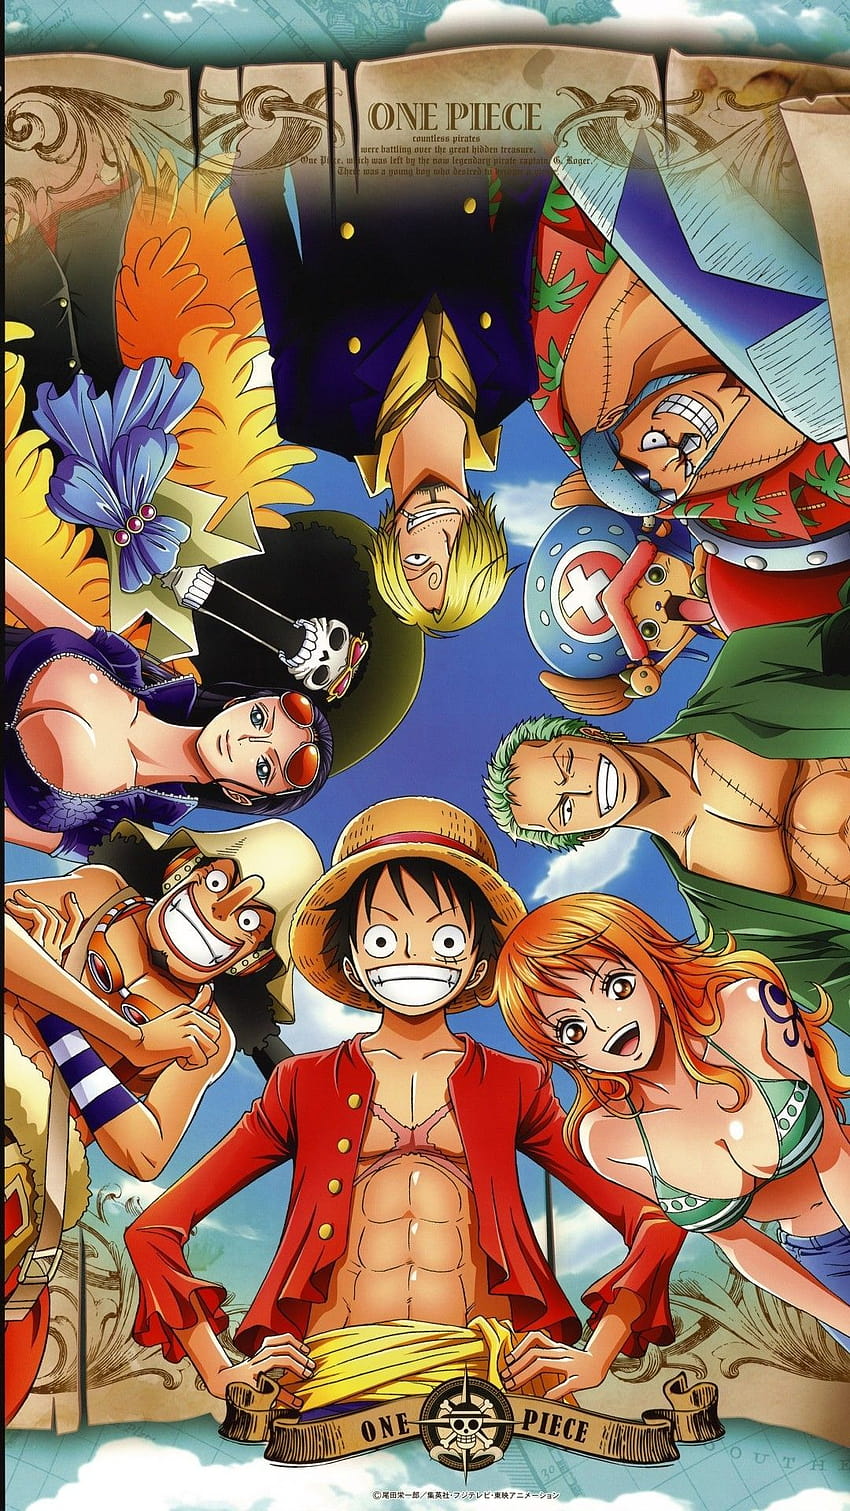 Android One Piece, topi jerami one piece amoled wallpaper ponsel HD